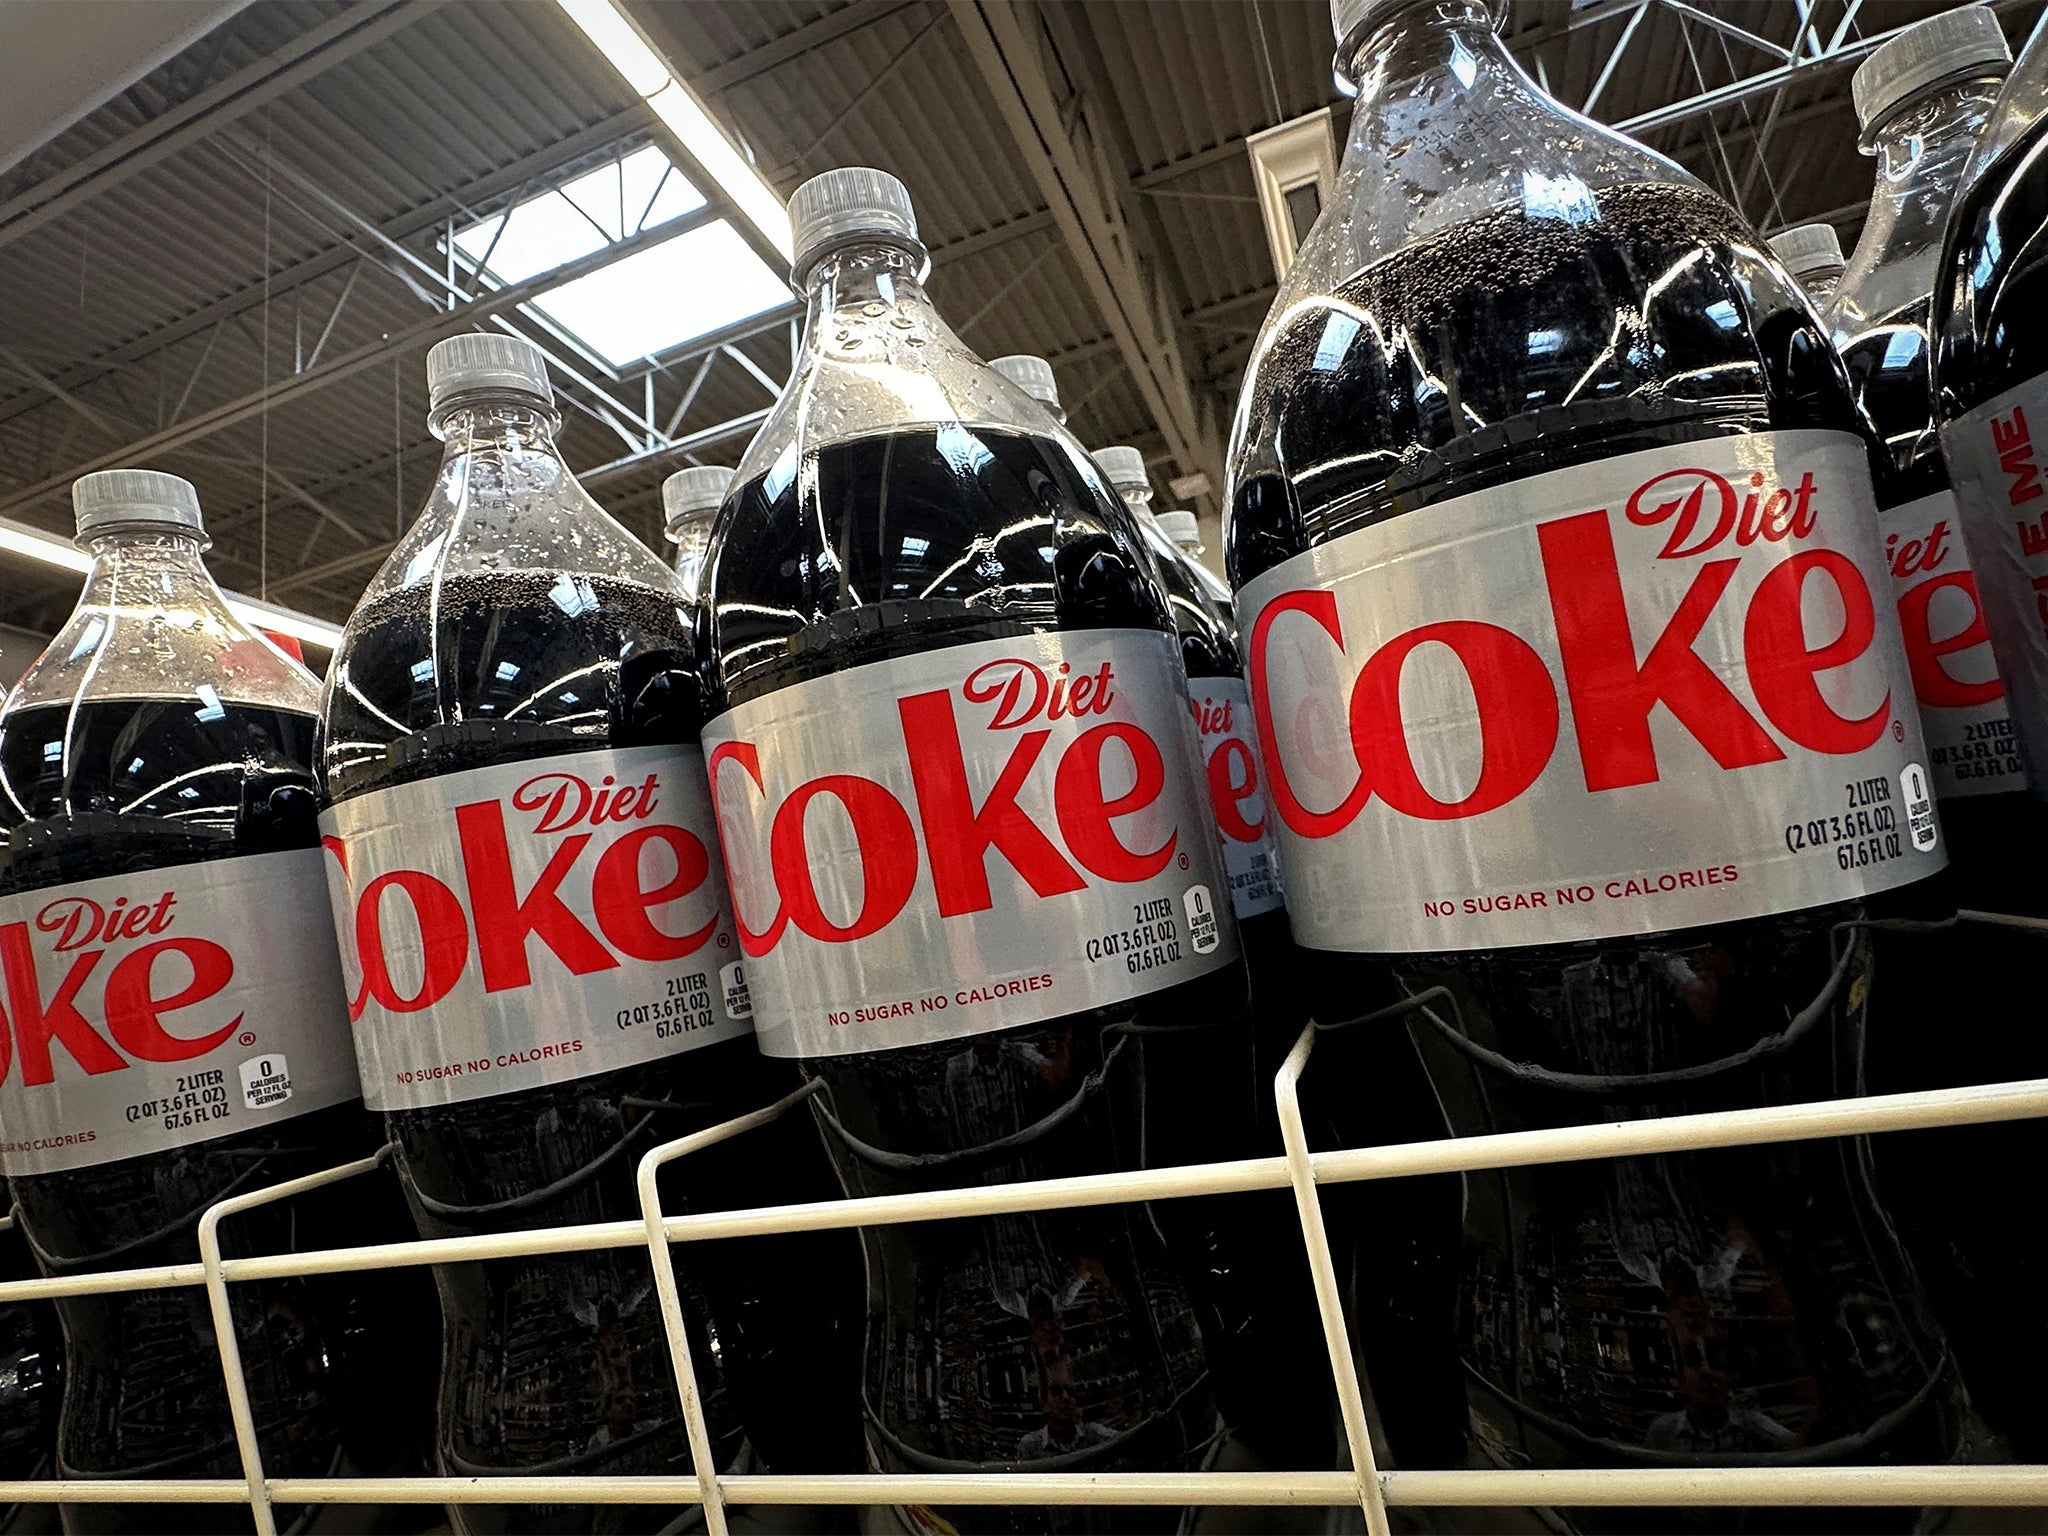 Diet Coke, which contains aspartame, on sale